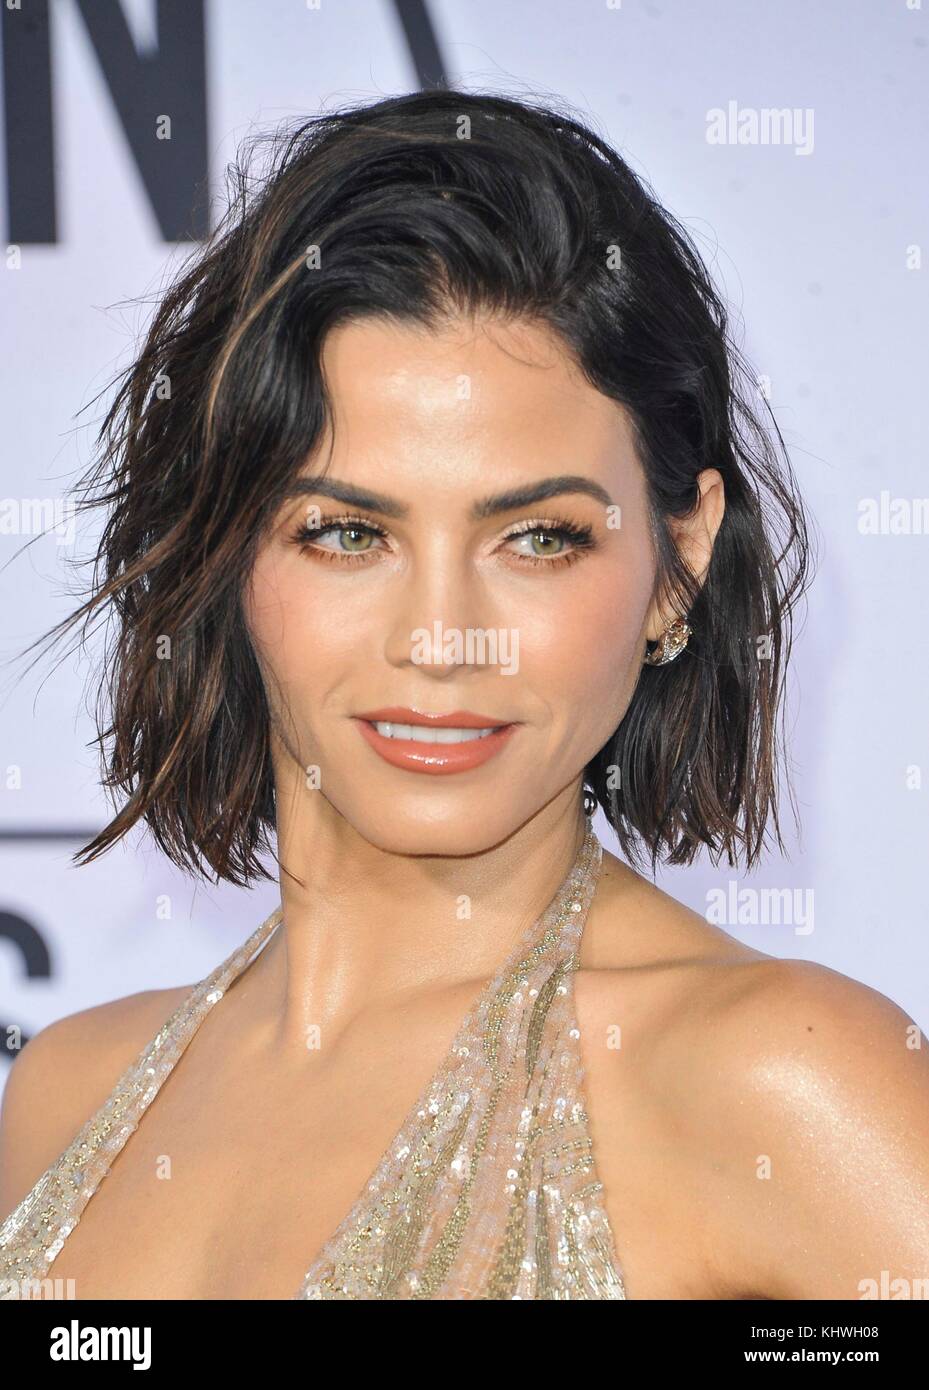 Los Angeles, CA, USA. 19th Nov, 2017. Jenna Dewan at arrivals for 2017 American Music Awards (AMAs) - Arrivals, Microsoft Theater, Los Angeles, CA November 19, 2017. Credit: Elizabeth Goodenough/Everett Collection/Alamy Live News Stock Photo